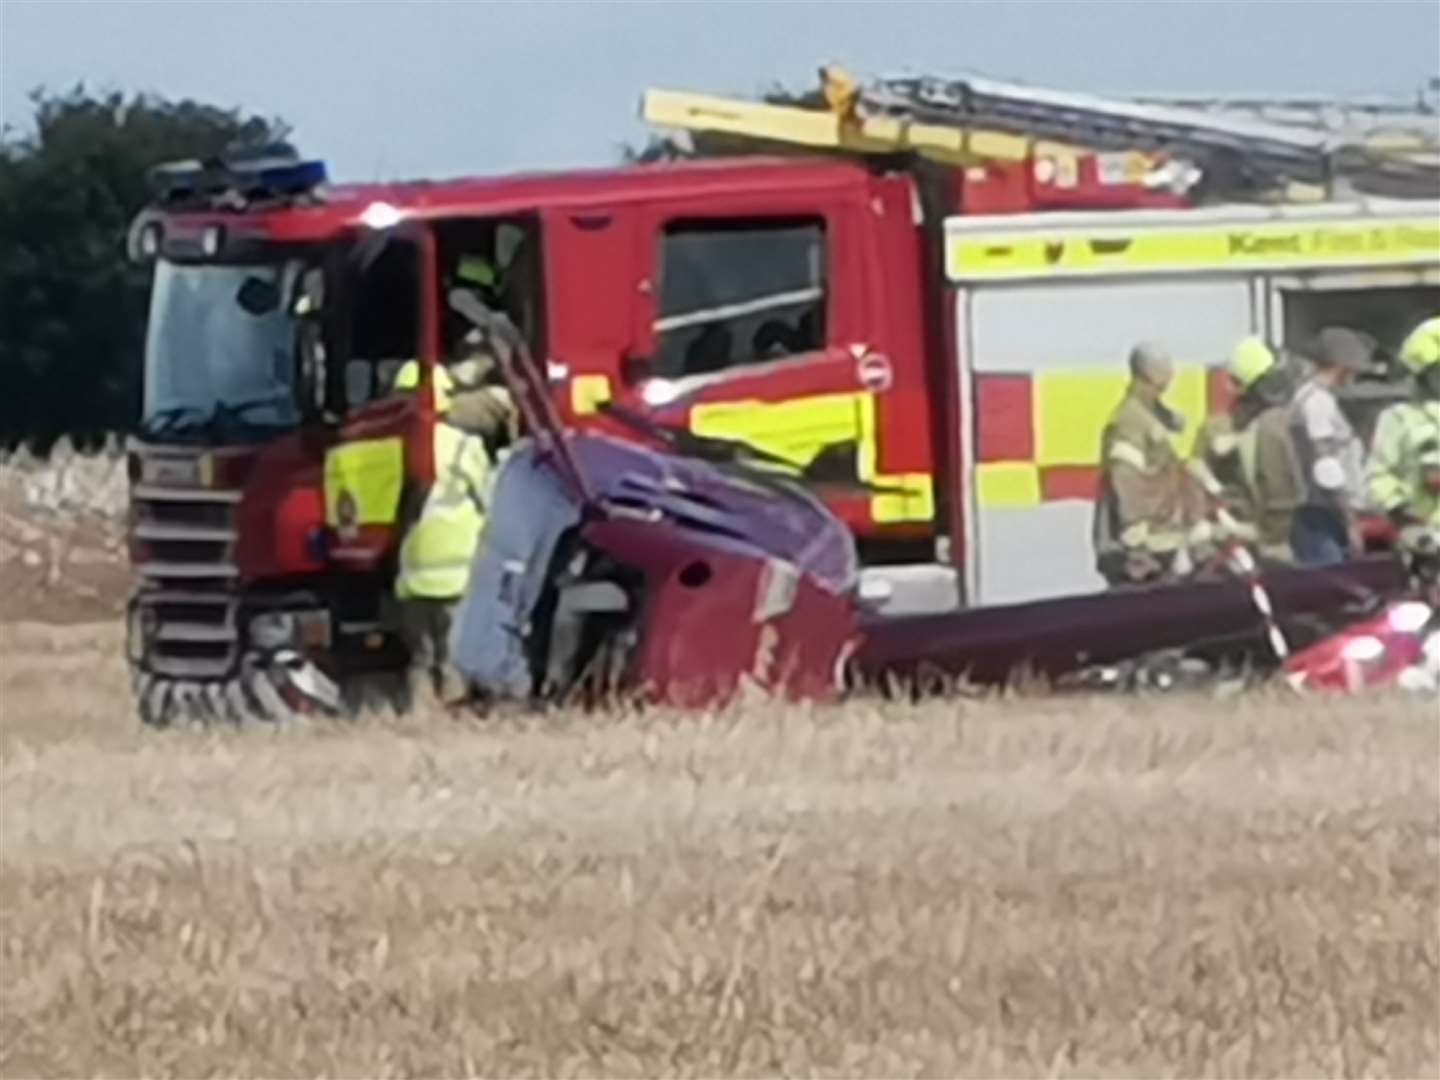 Emergency services at the scene of the helicopter crash. Picture: Paul Shipley-Weller